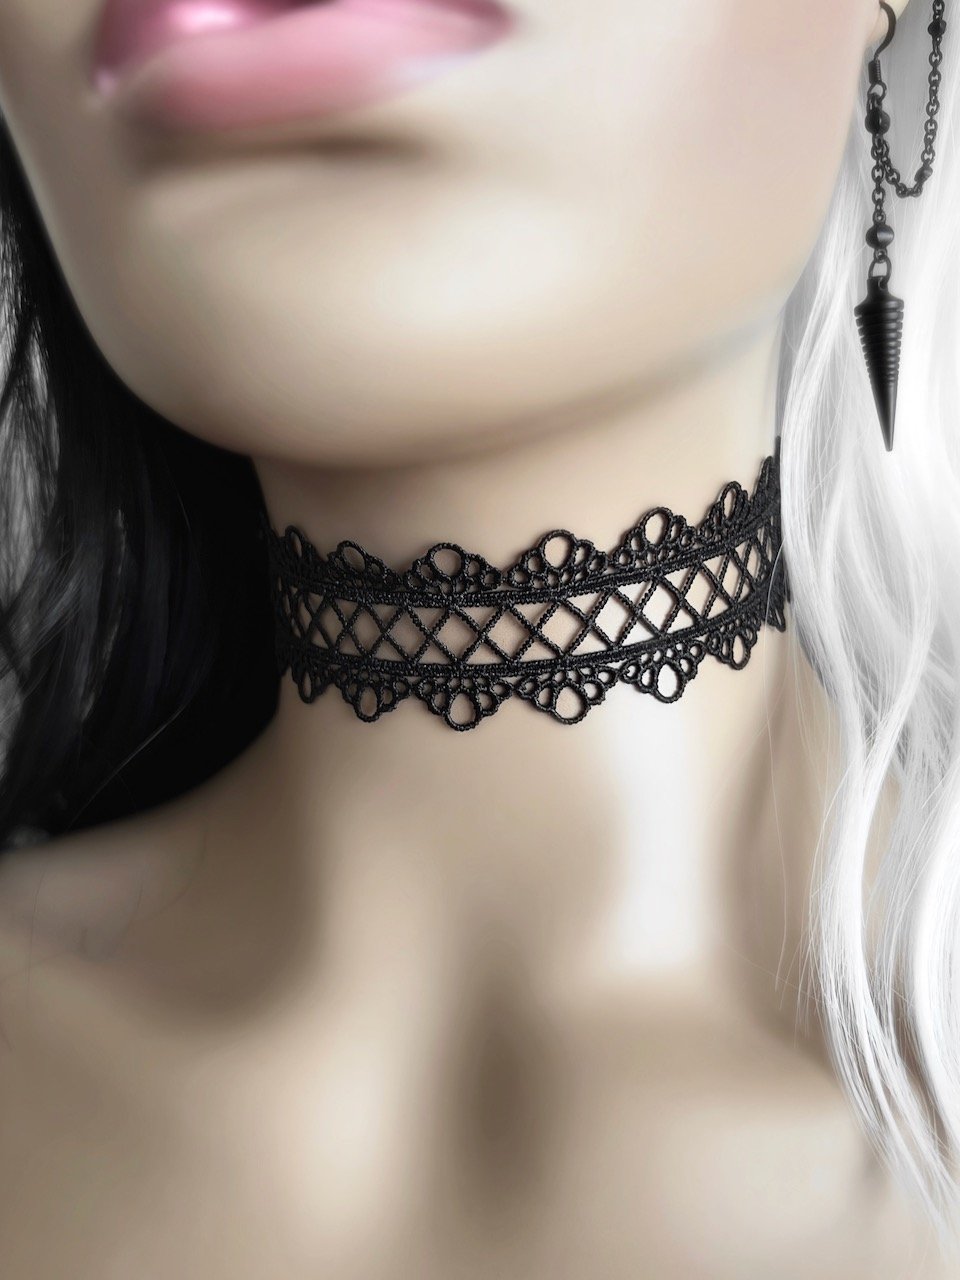 Gothic Necklaces and Chokers - Good Goth